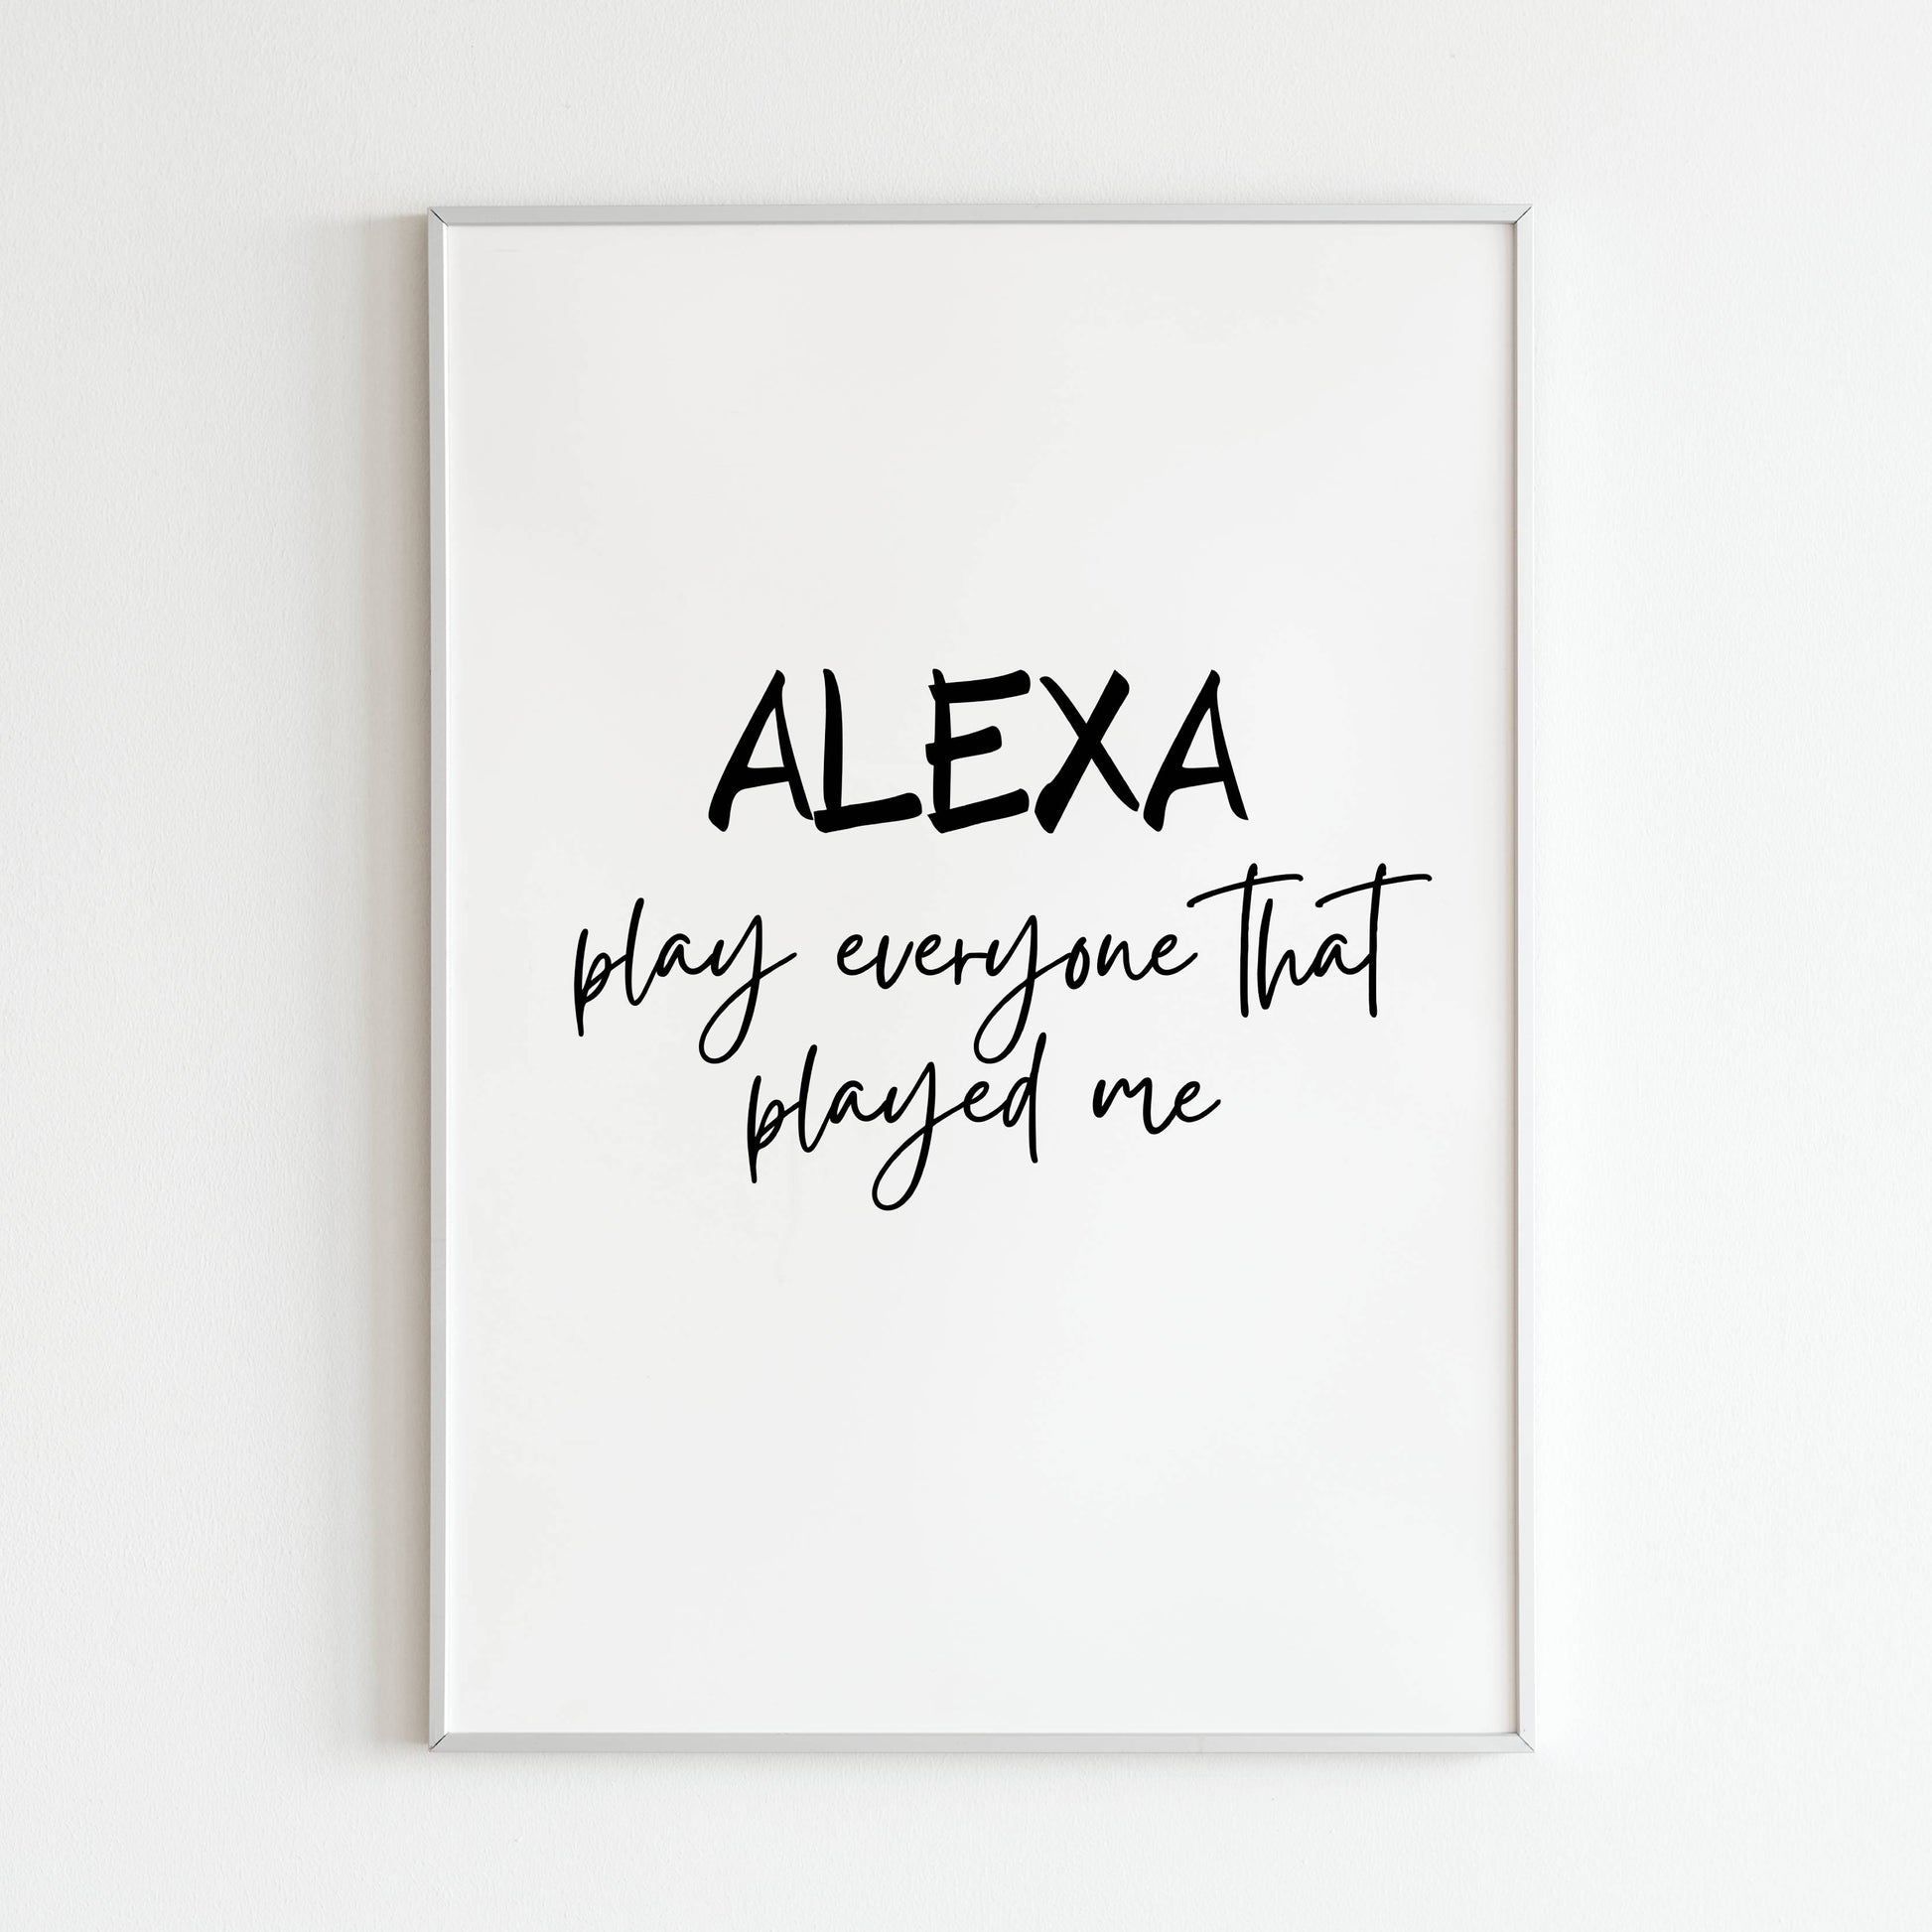 Downloadable "Alexa, Play everyone that played me" art print, for music lovers who embrace diverse sounds.